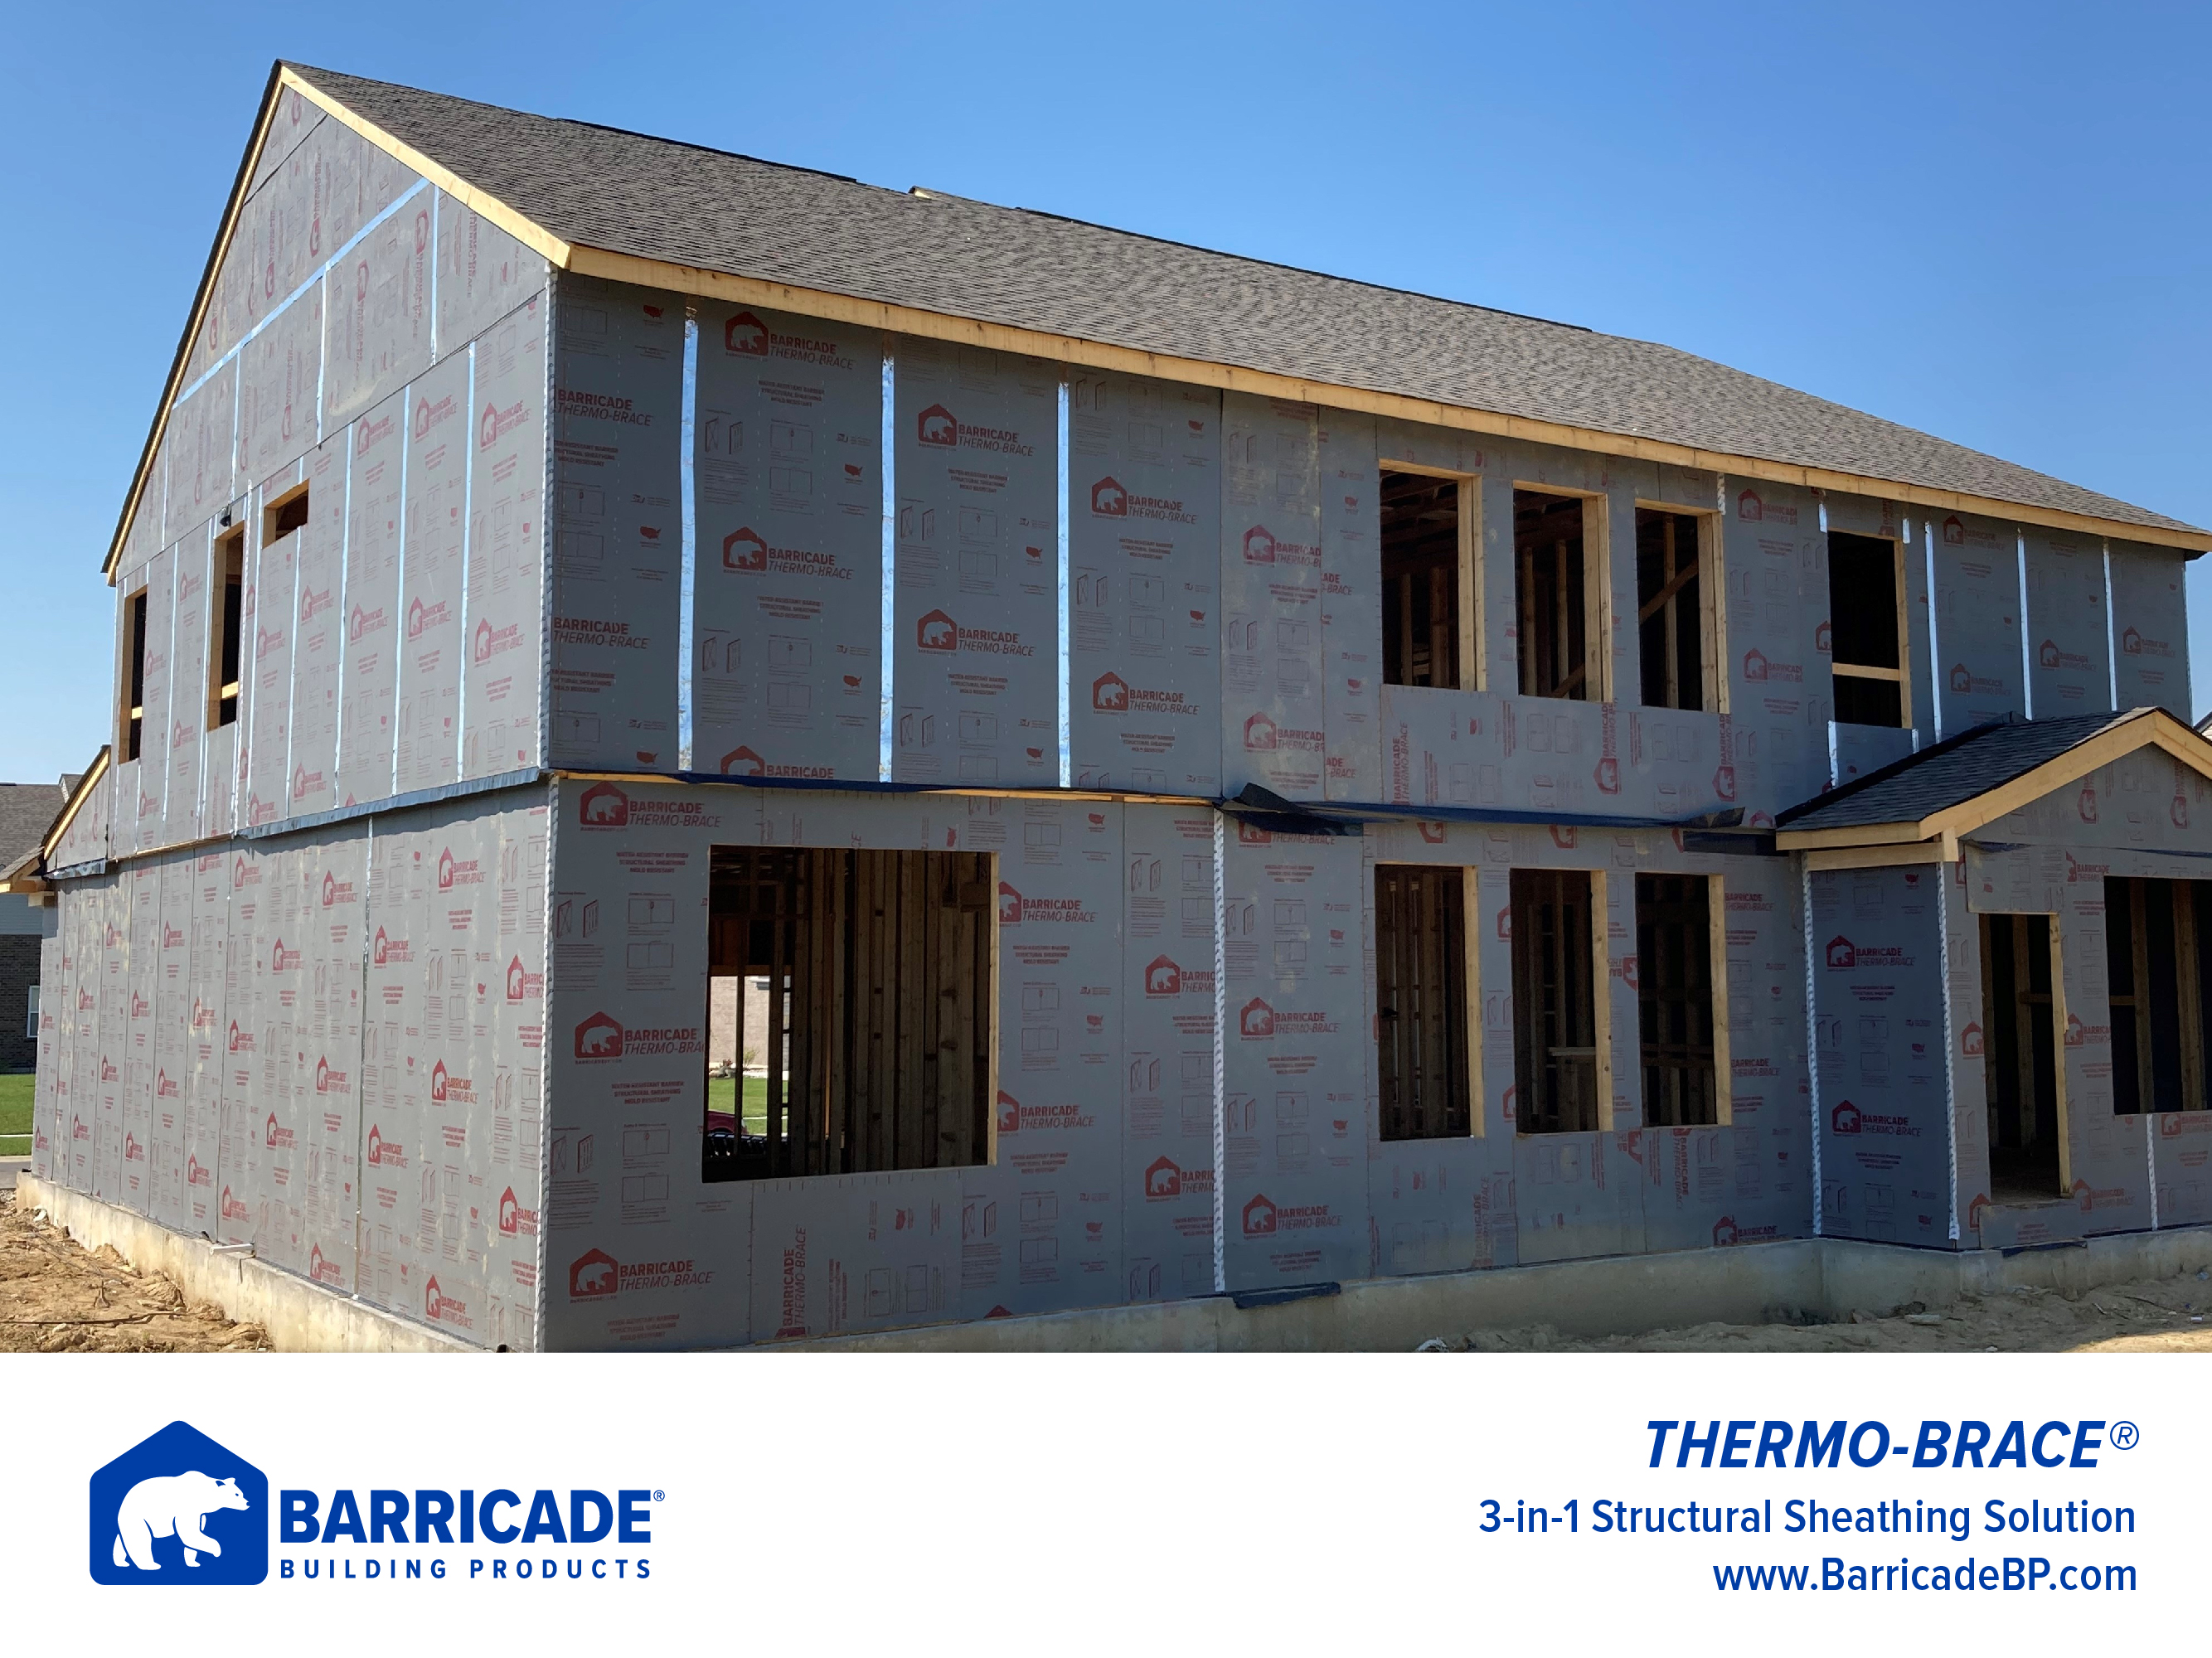 Barricade Thermo-Brace Lightweight Structural Sheathing